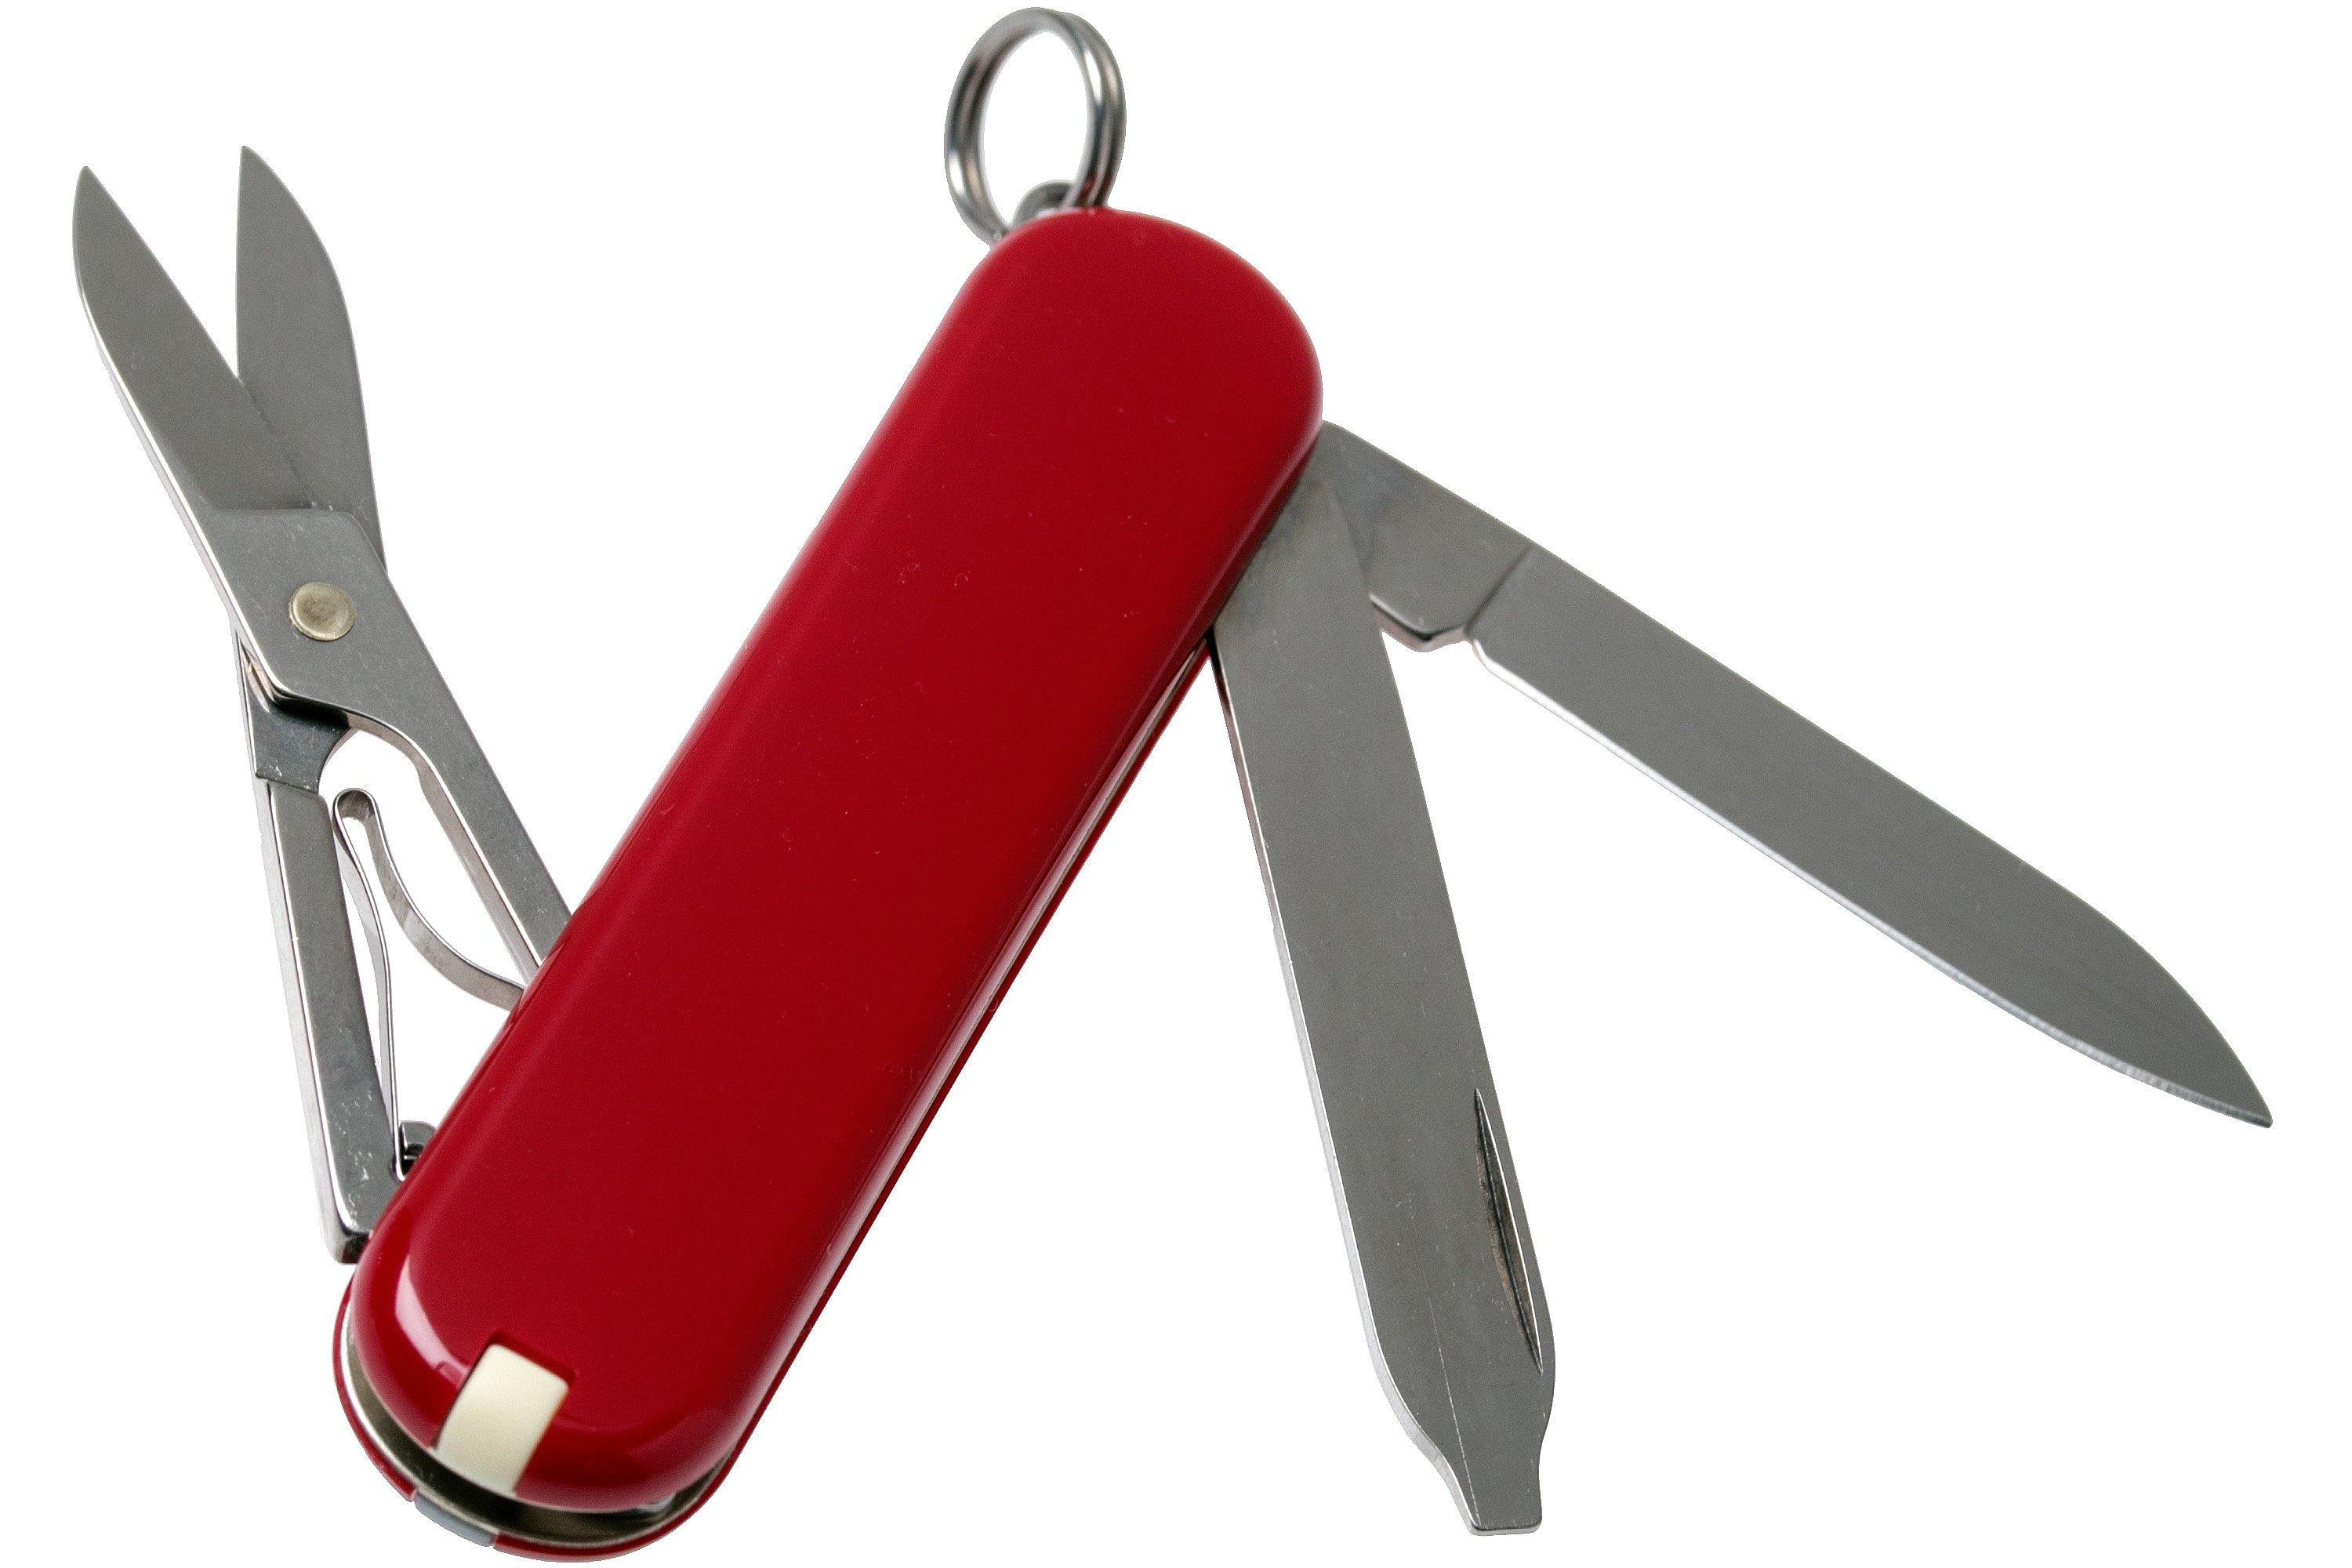 Victorinox Classic SD, red  Advantageously shopping at